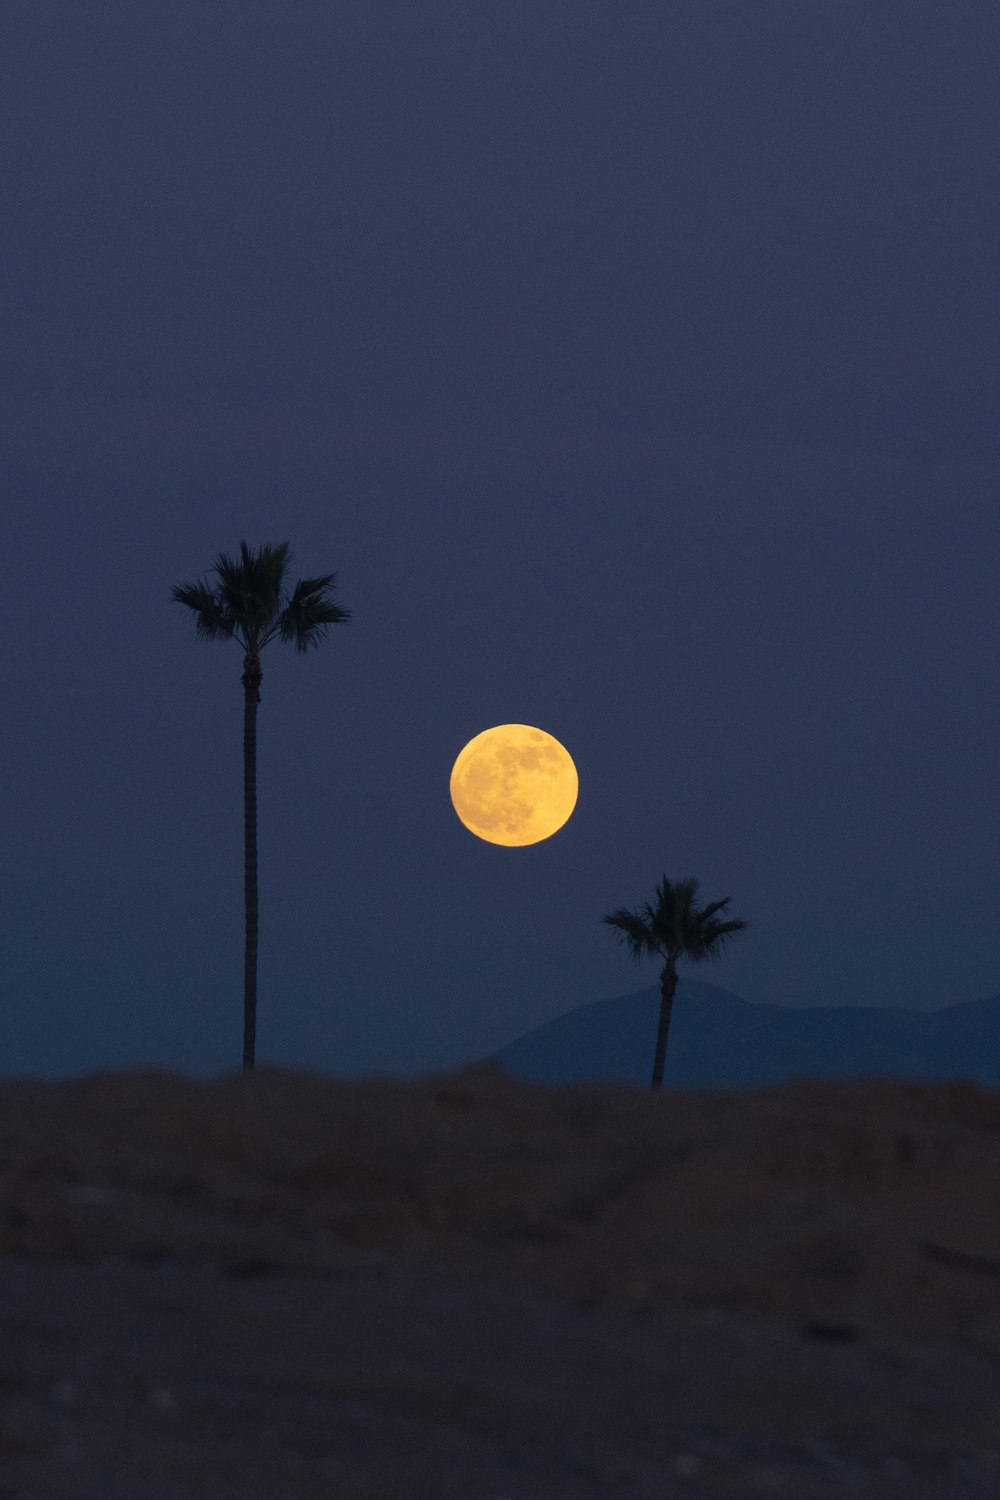 full moon over the palm trees